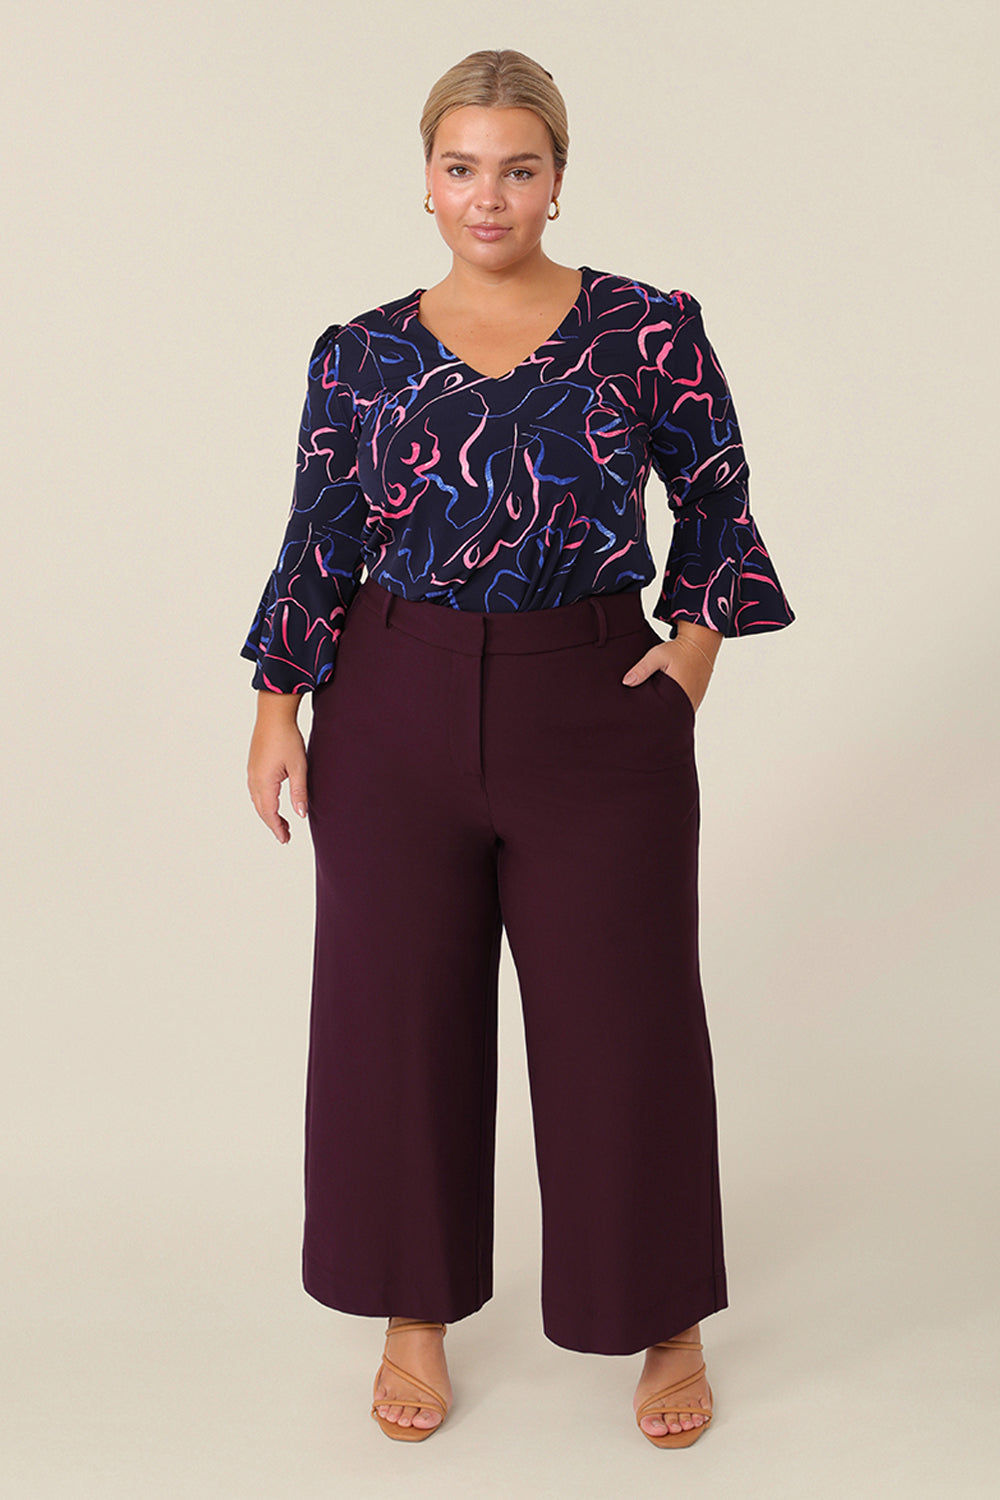 A chic top for plus size and fuller figure women, this V-neck top with fluted 3/4 sleeves comes in a navy and pink abstract print. Worn with a knee-length navy skirt, this top is good for work and corporate wear.